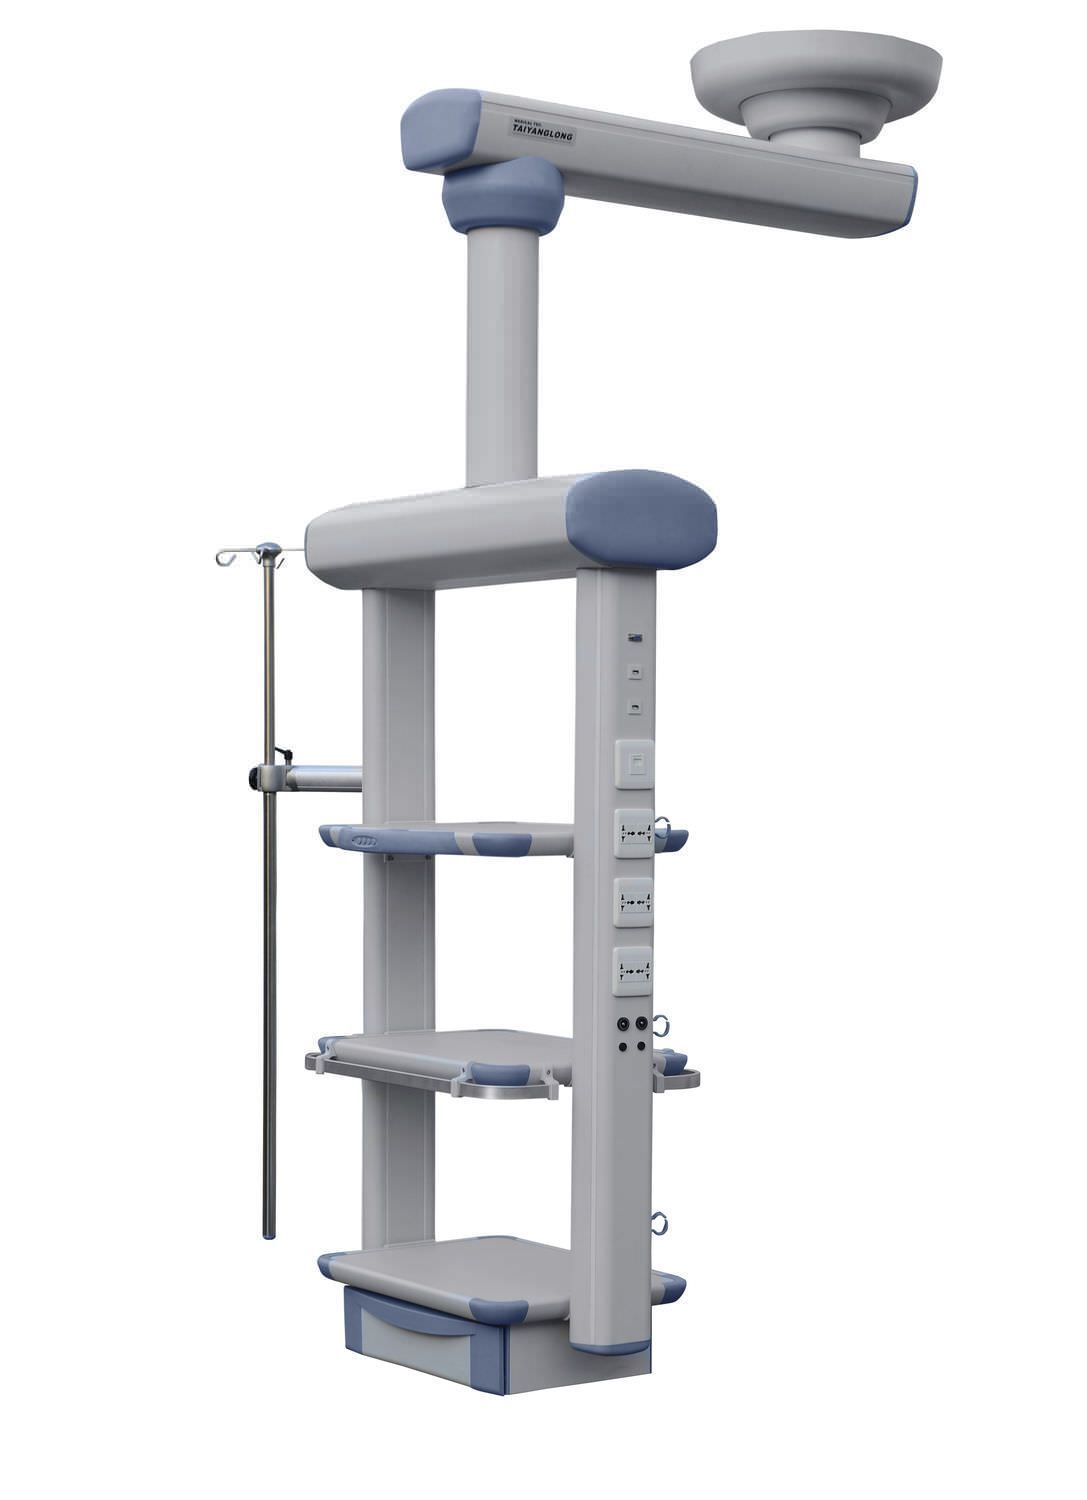 Ceiling-mounted medical pendant / articulated / single-arm / ICU YDT-IDT Hunan taiyanglong medical